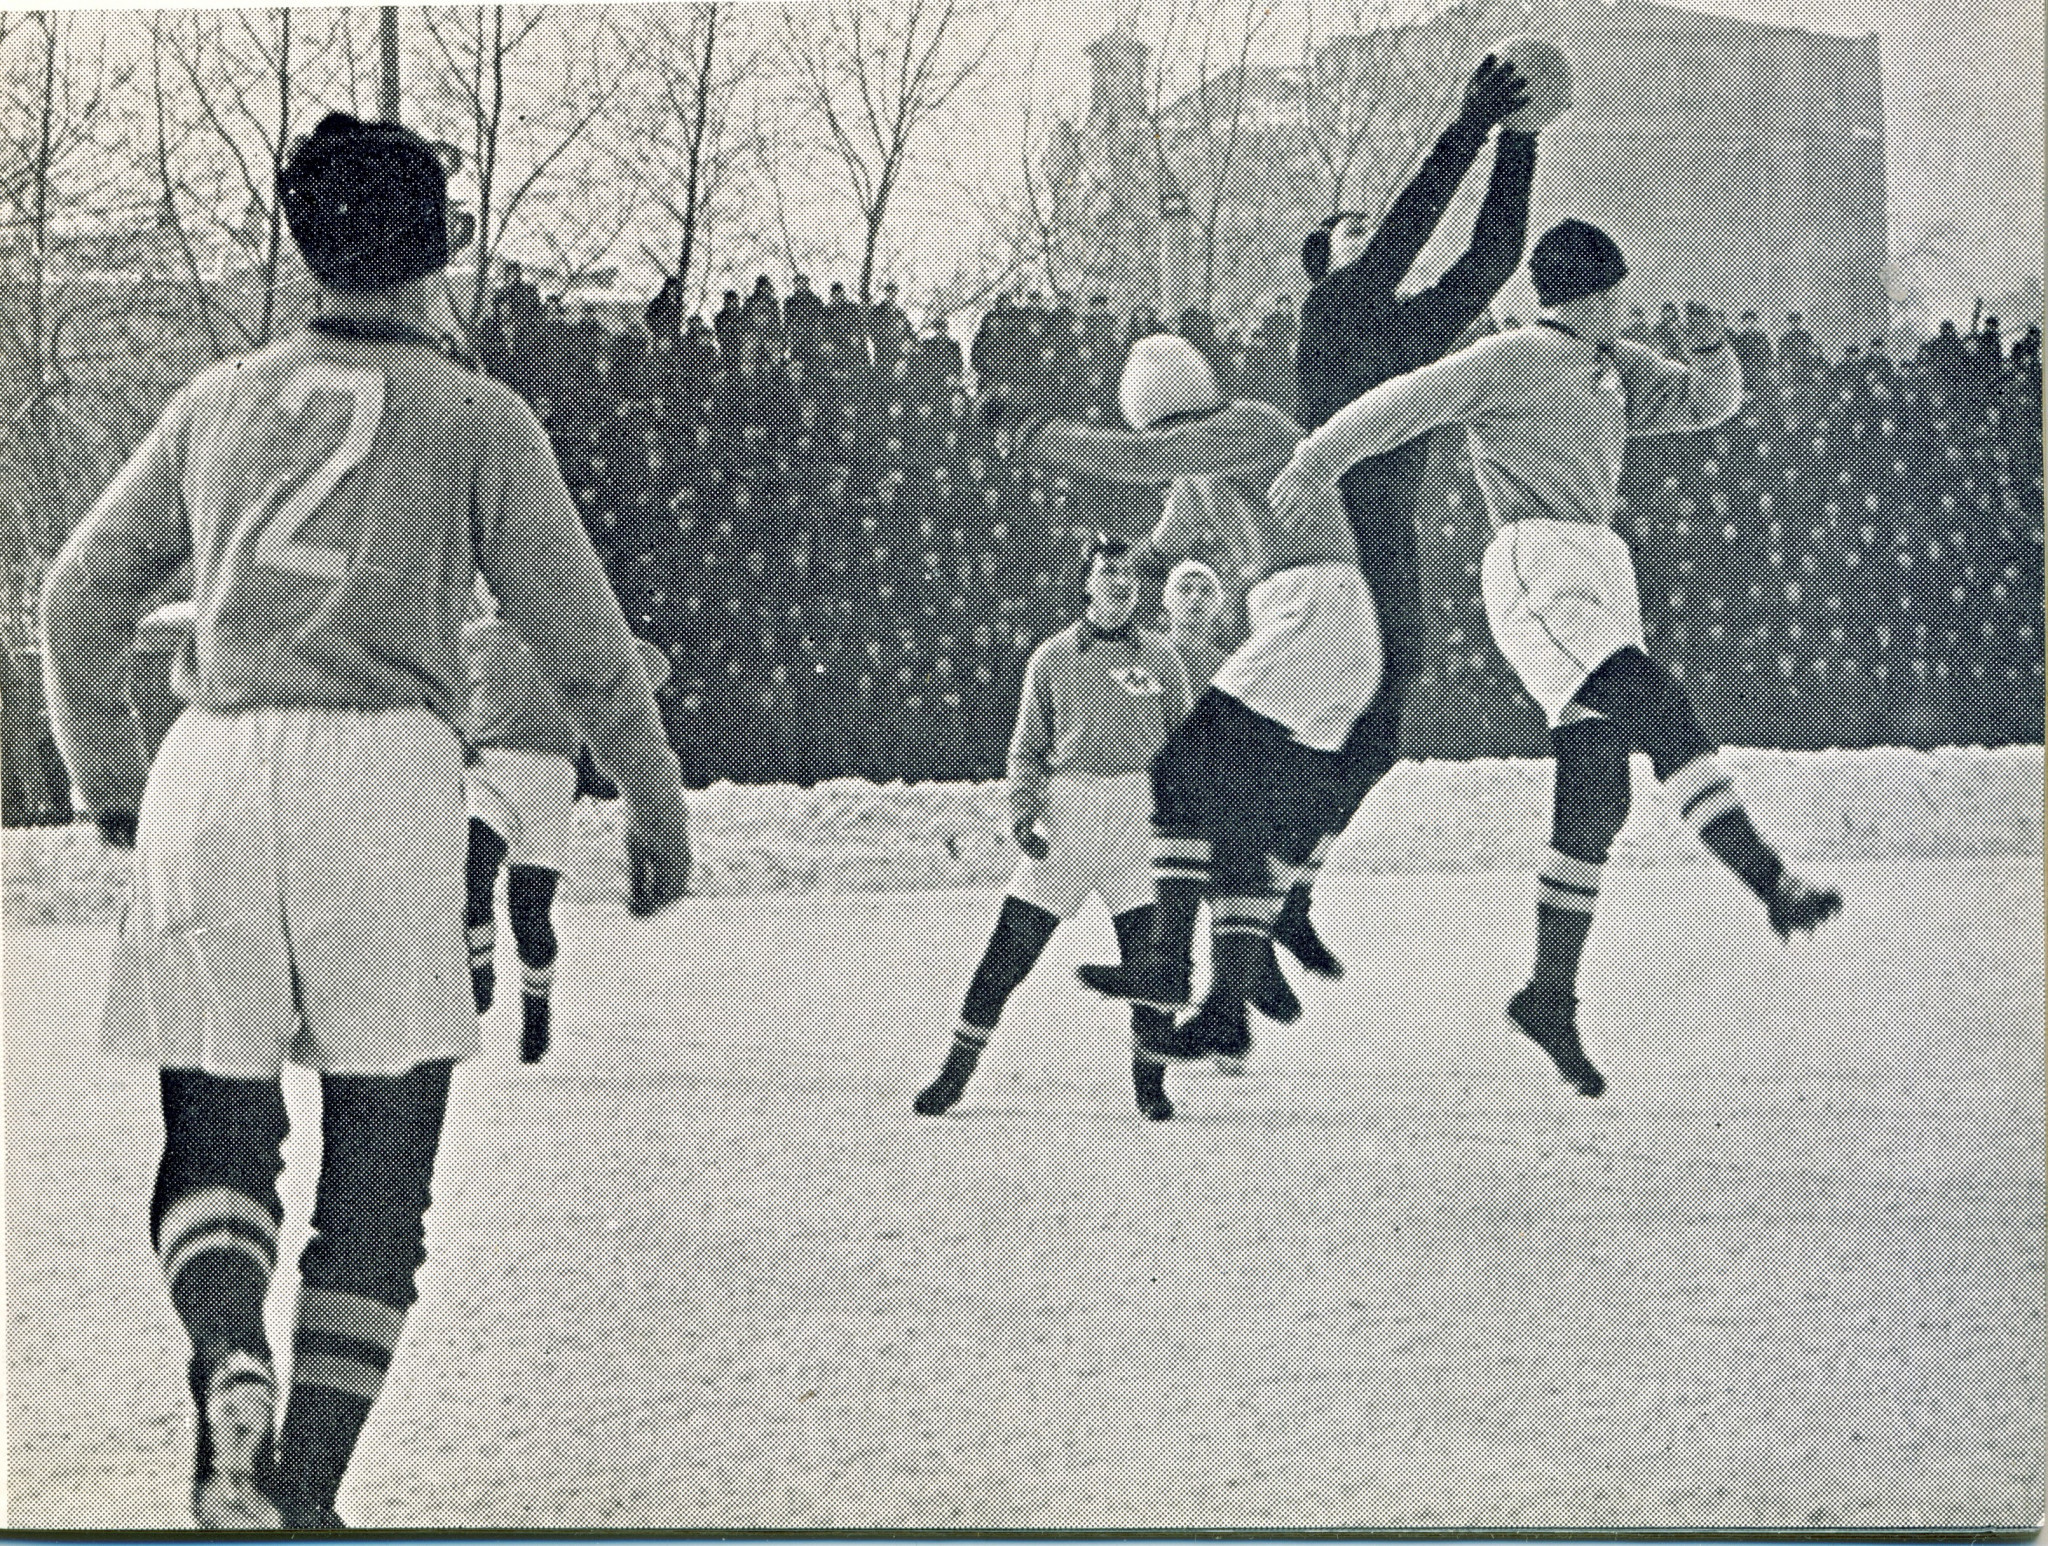 Russian footballers compete in the snow ©Philip Barker